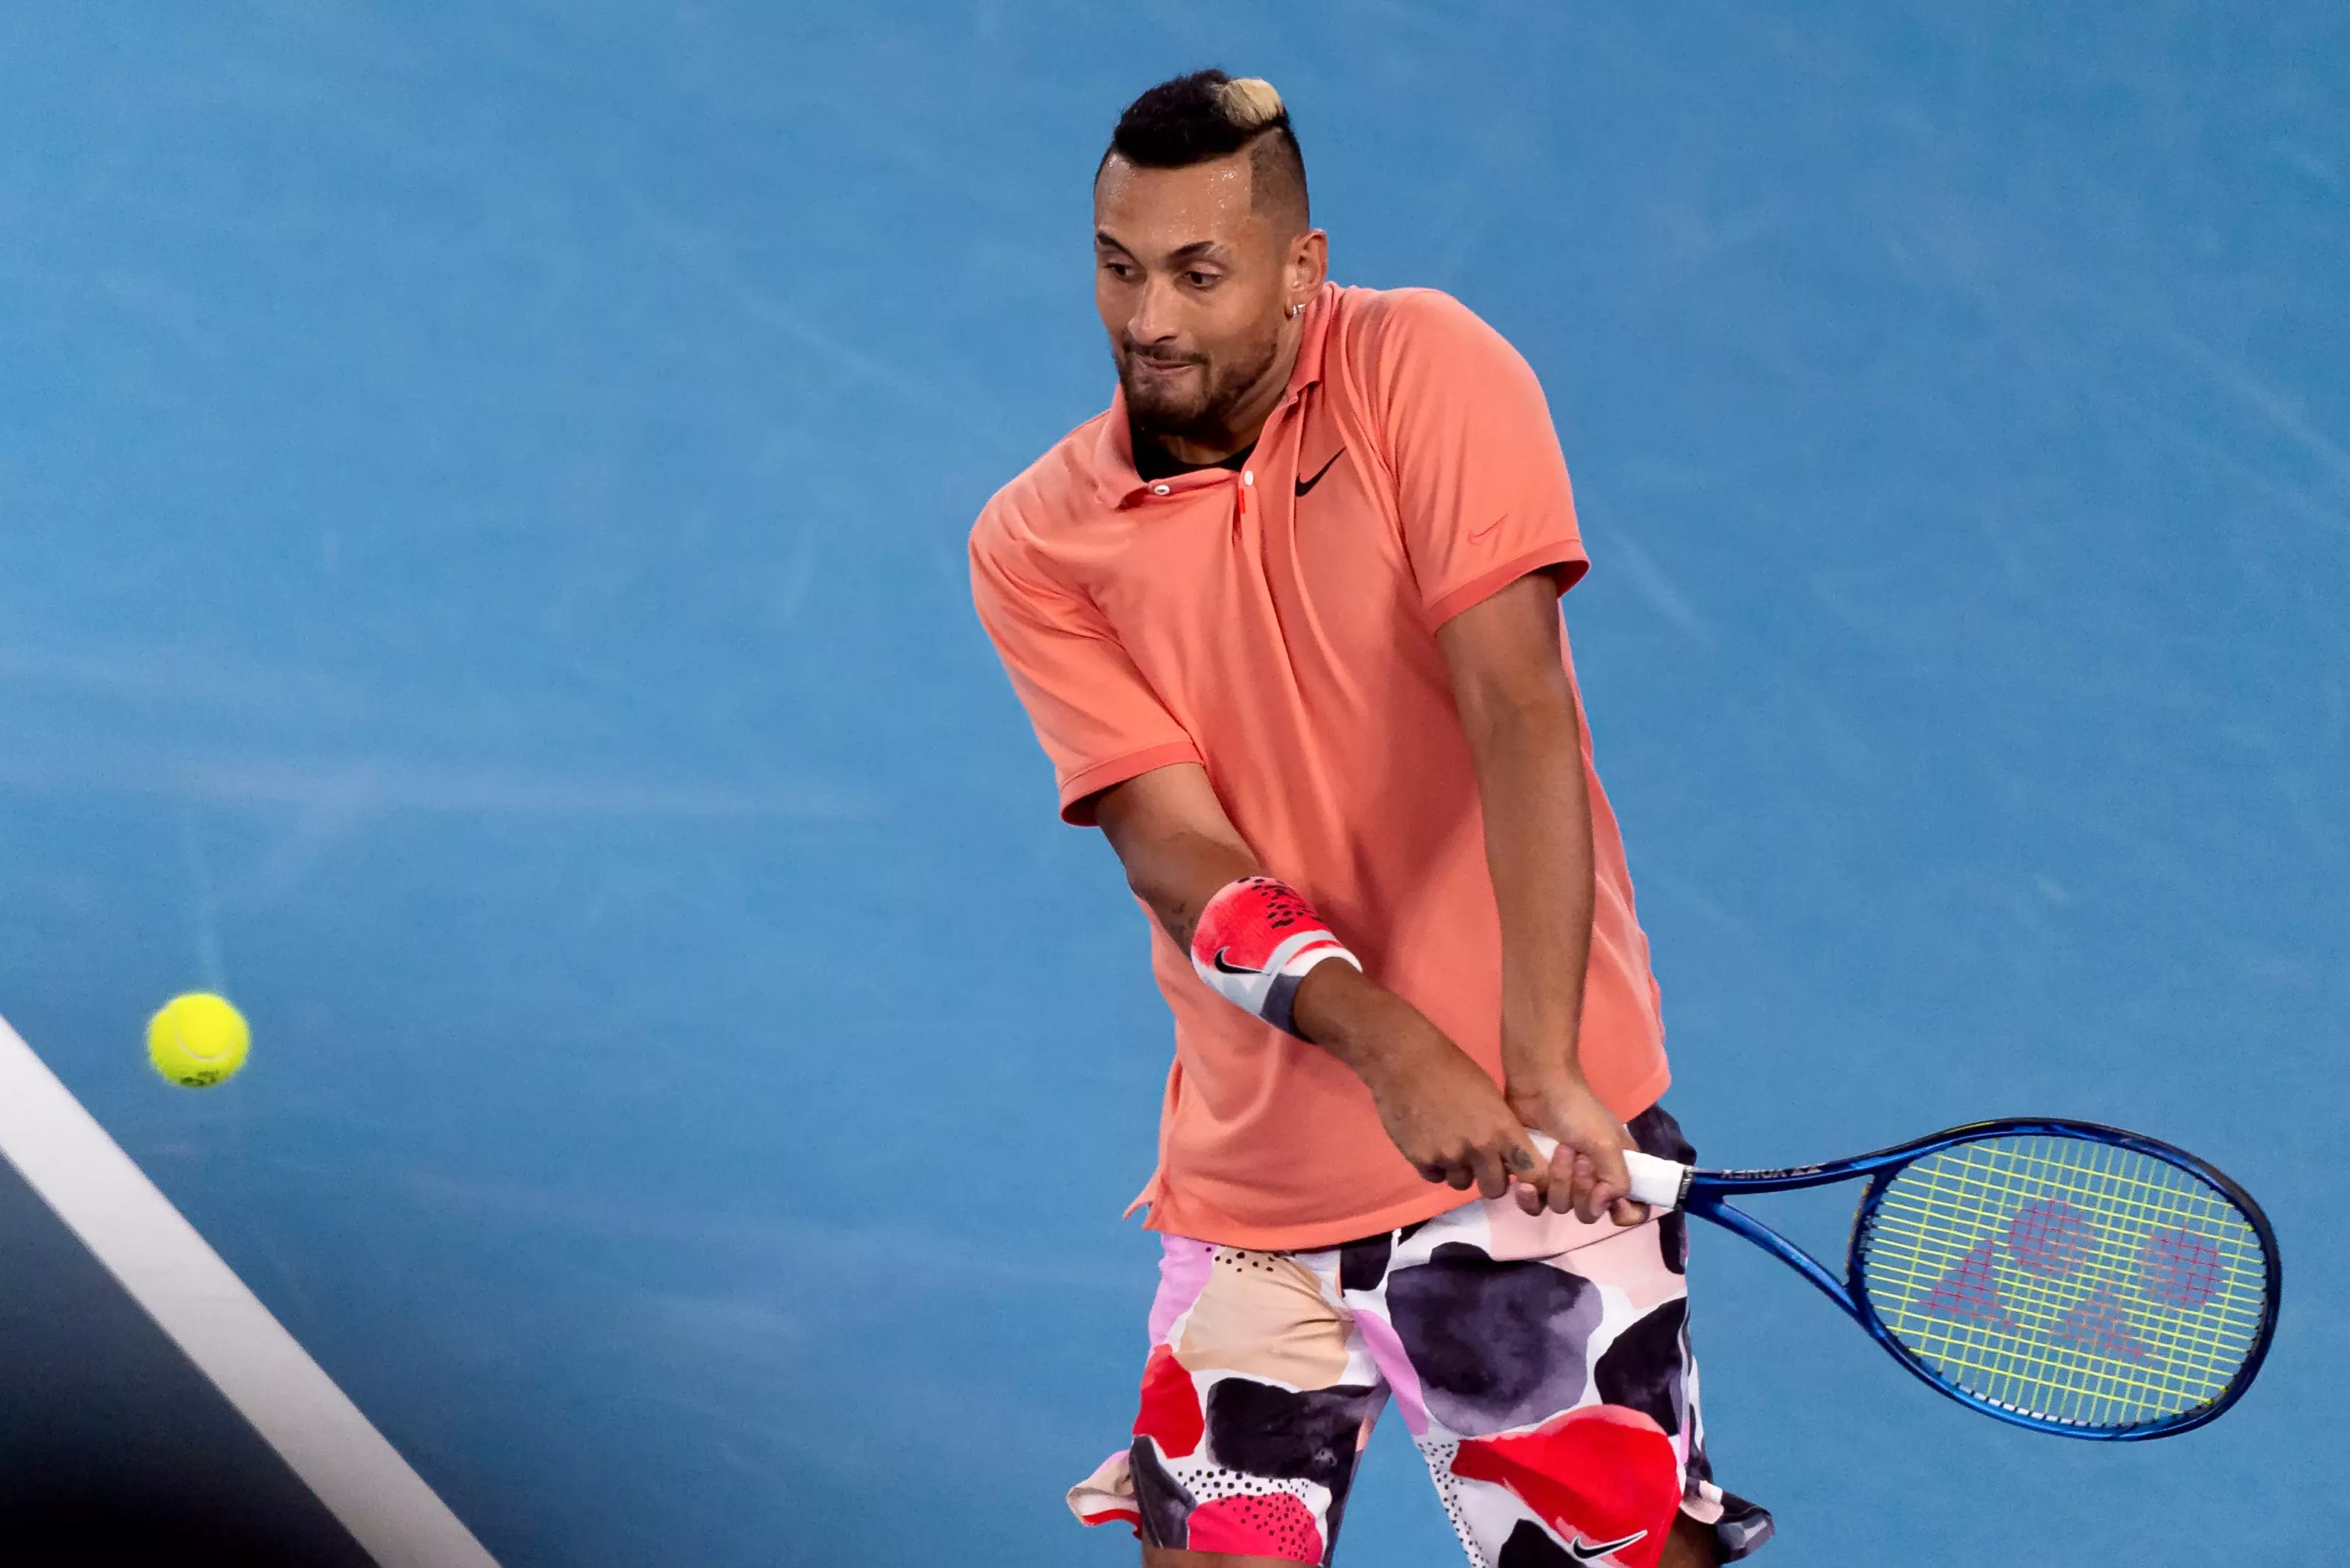 Kyrgios had strong words for those who participated in the Adria Tour. (Image